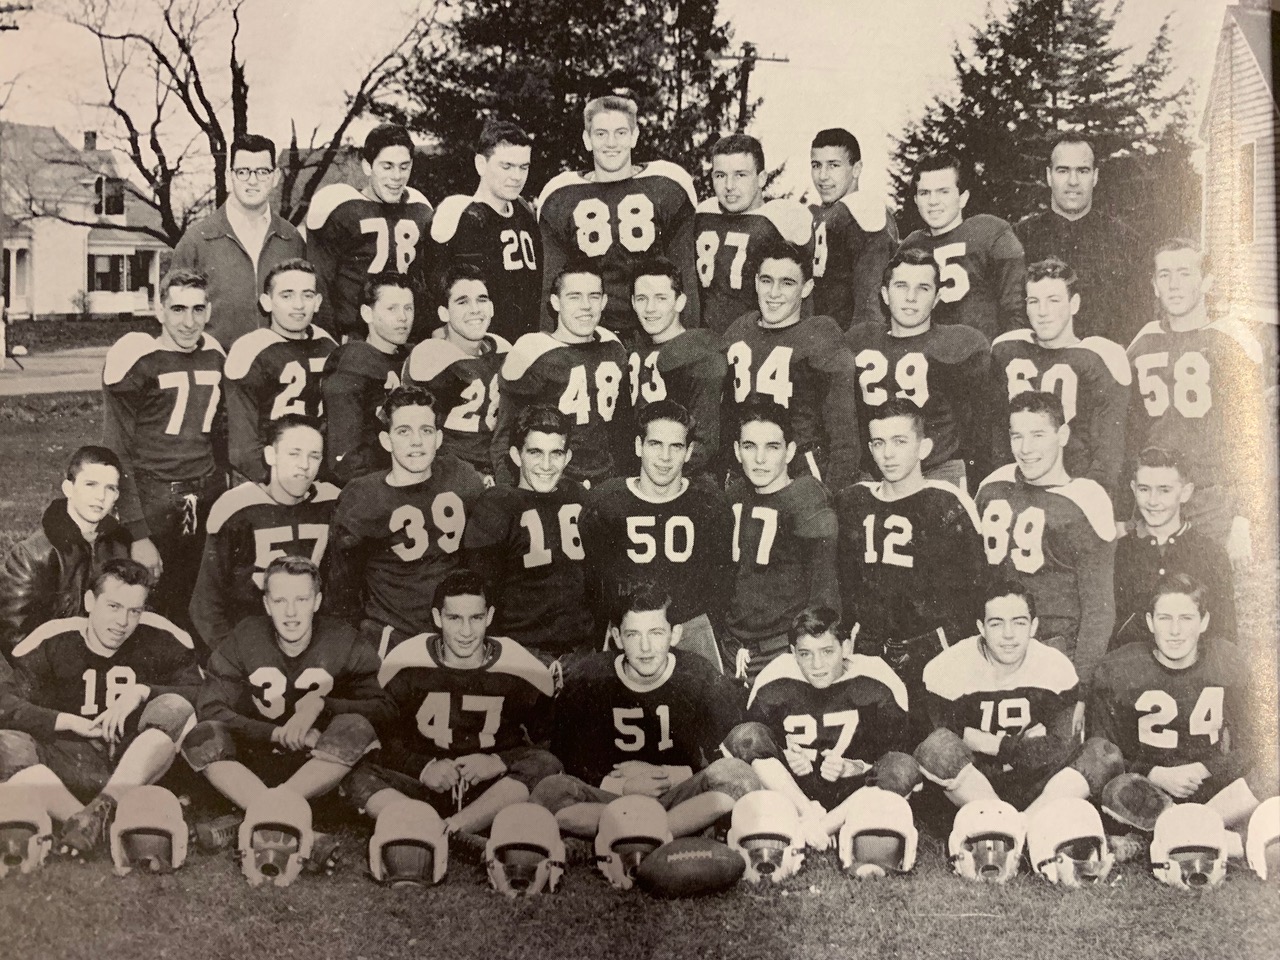 Tales from a Townie: 1955 Hillers overcame challenges to go undefeated